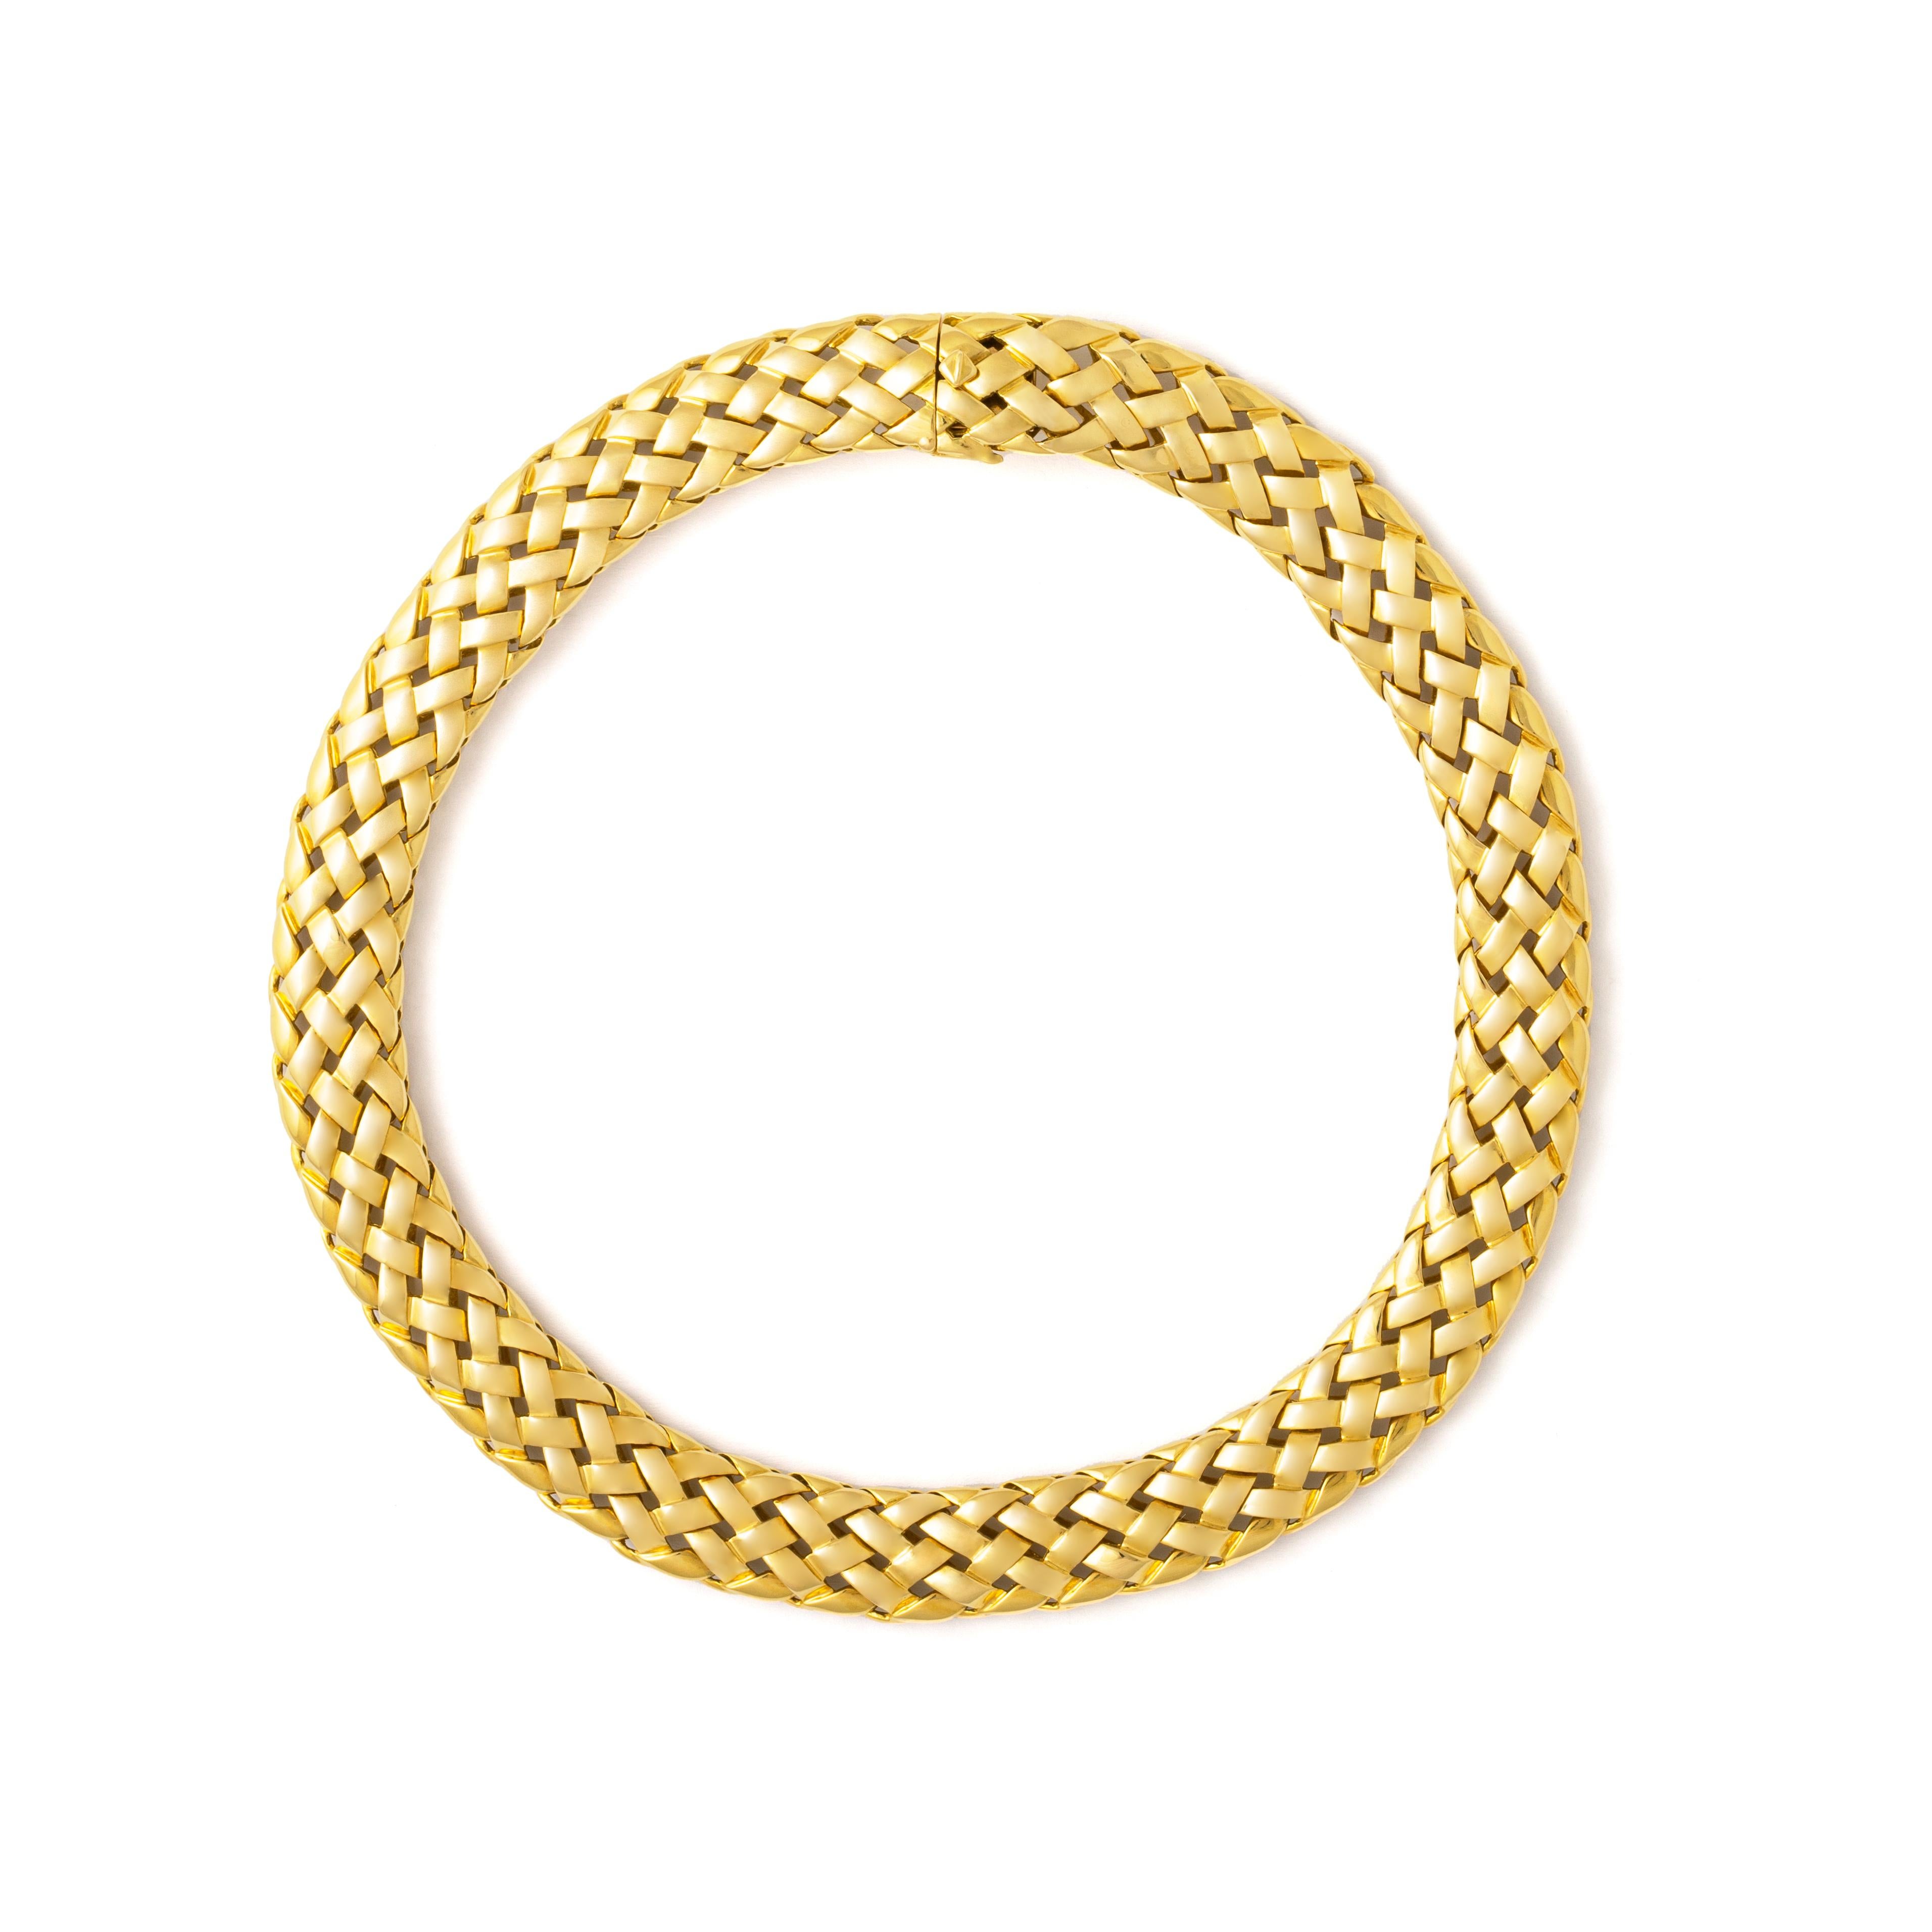 Van Cleef and Arpels Vintage basket weave wide Yellow Gold 18K Set composed by Earrings and Necklace. Circa 1980.
Signed Van Cleef and Arpels, marked and numbered.
French marks.

Necklace dimensions:
Total length: approx. 38.00 centimeters / 14.96